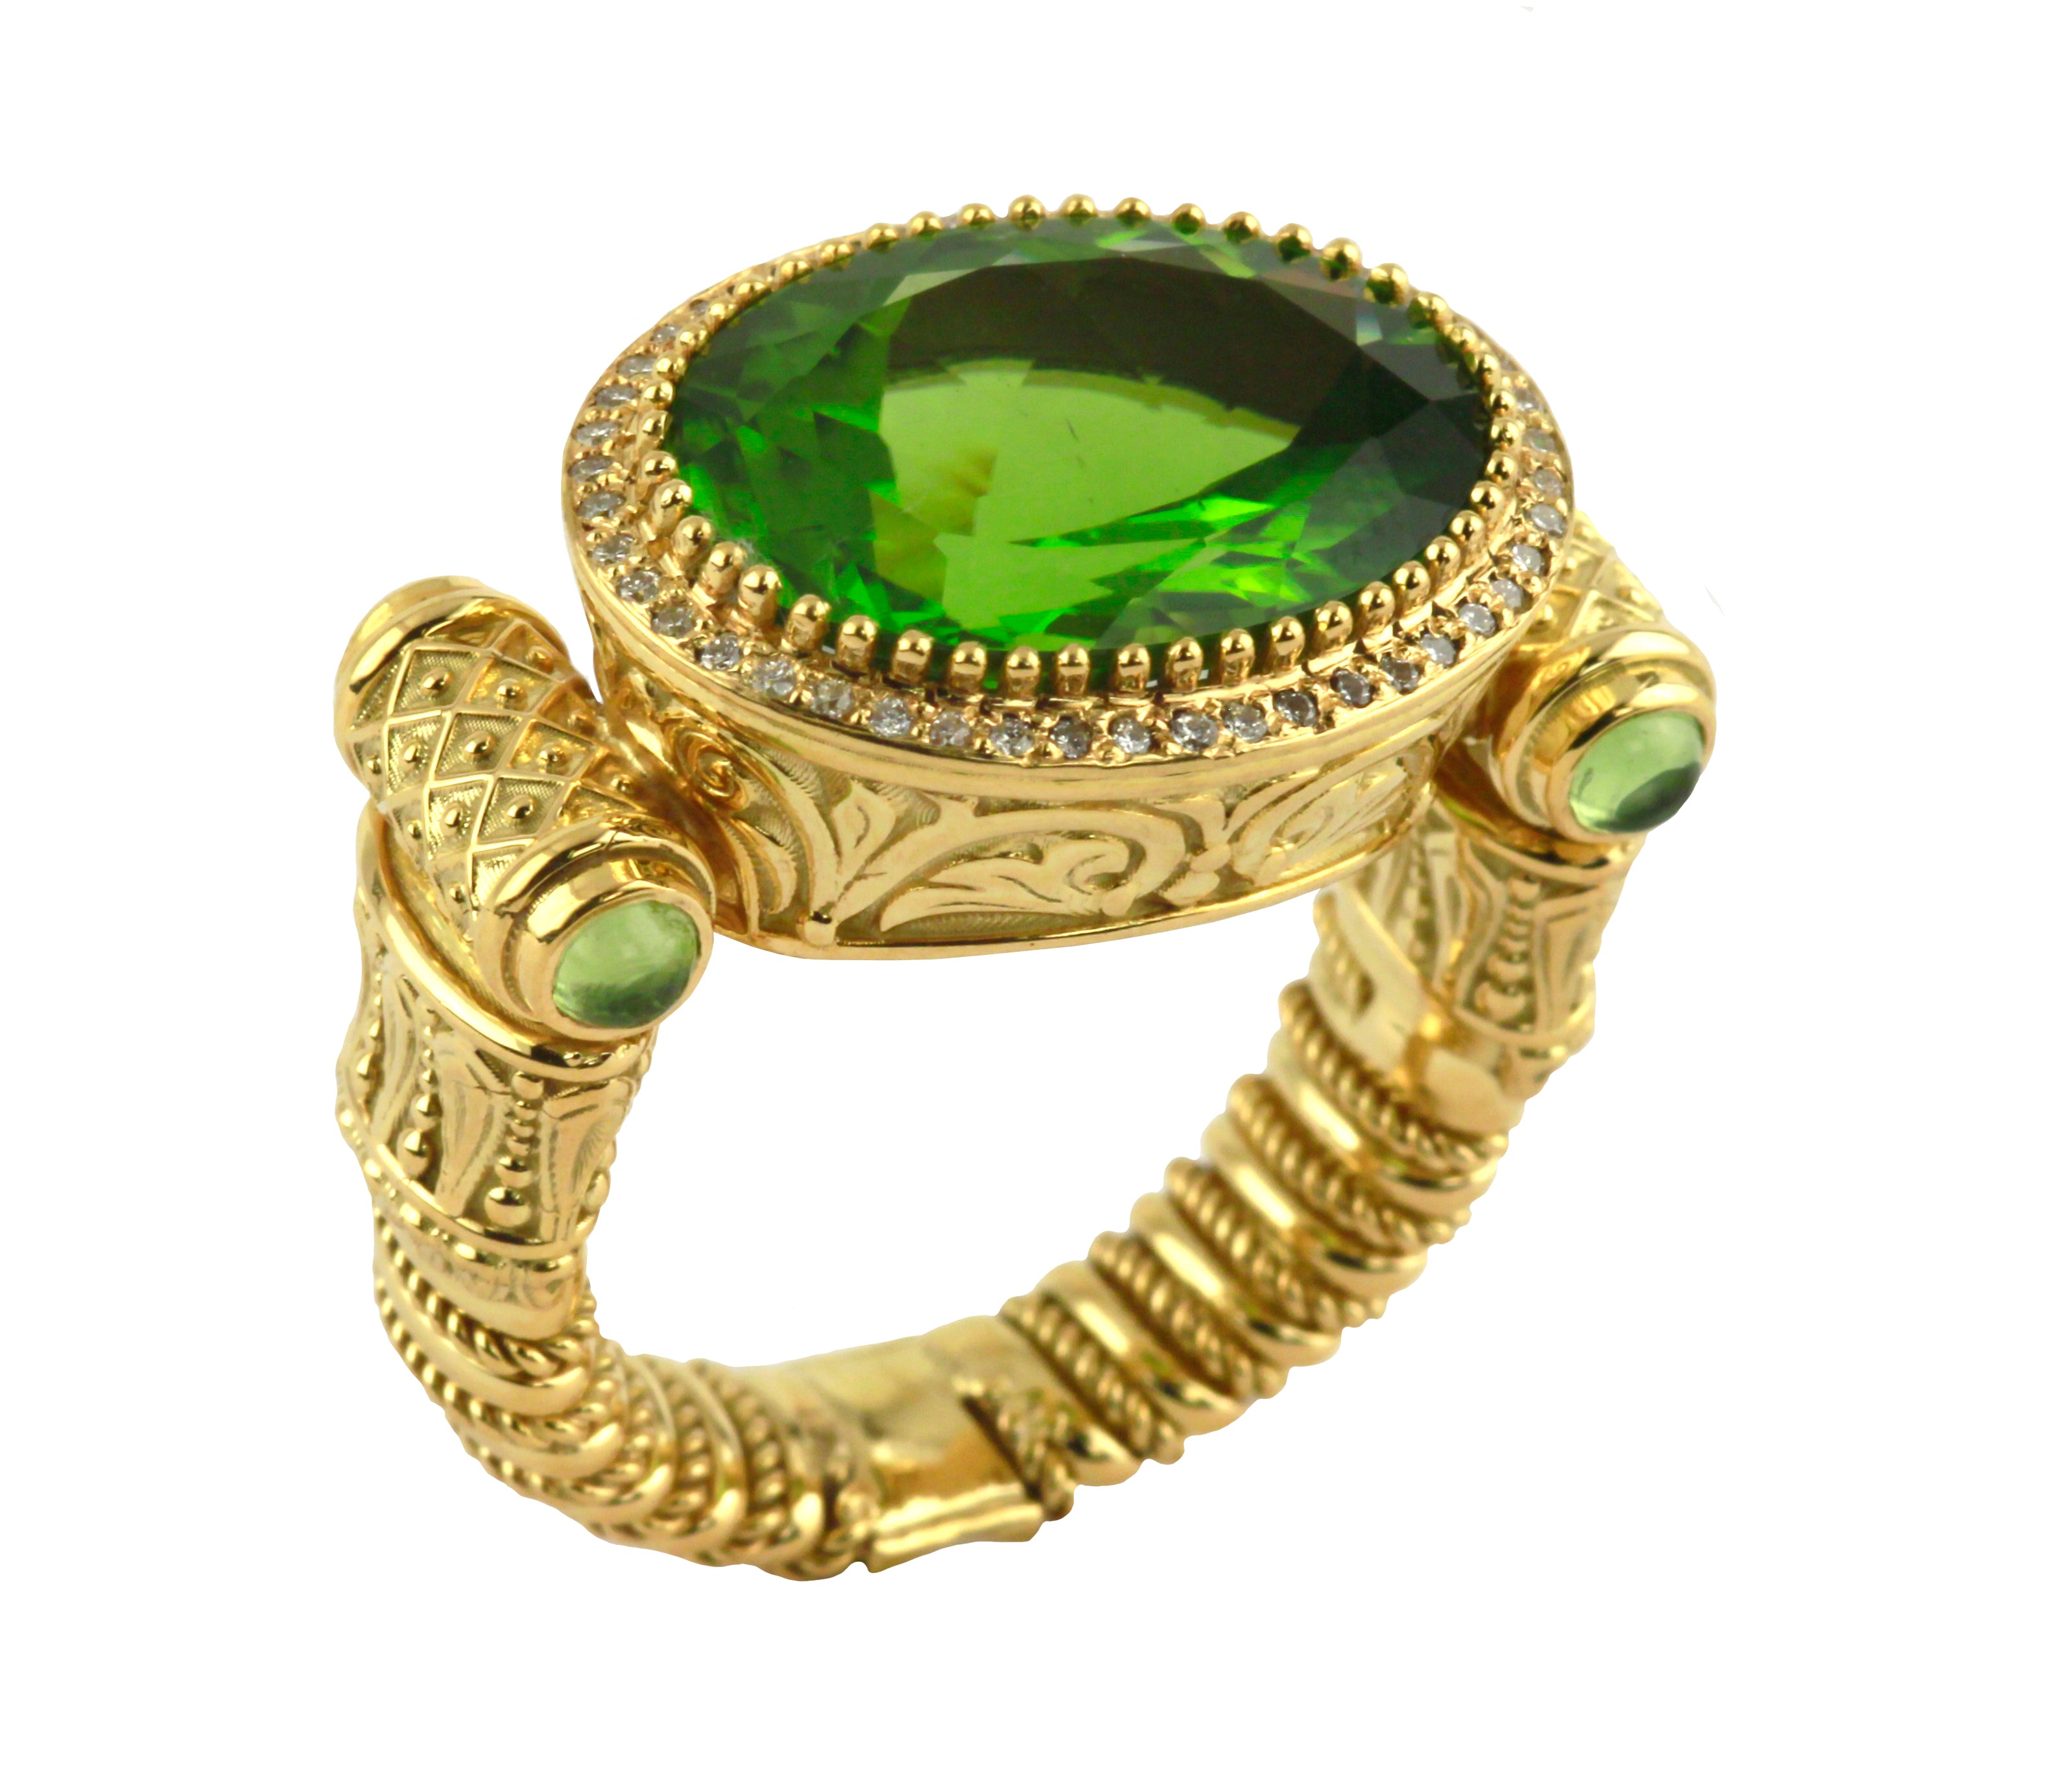 KONSTANTINO 18KT GOLD (10.7GR +/-) PERIDOT (10.2CT +/-) (OTHER STONE CHOICES AVAILABLE) RING FROM TH